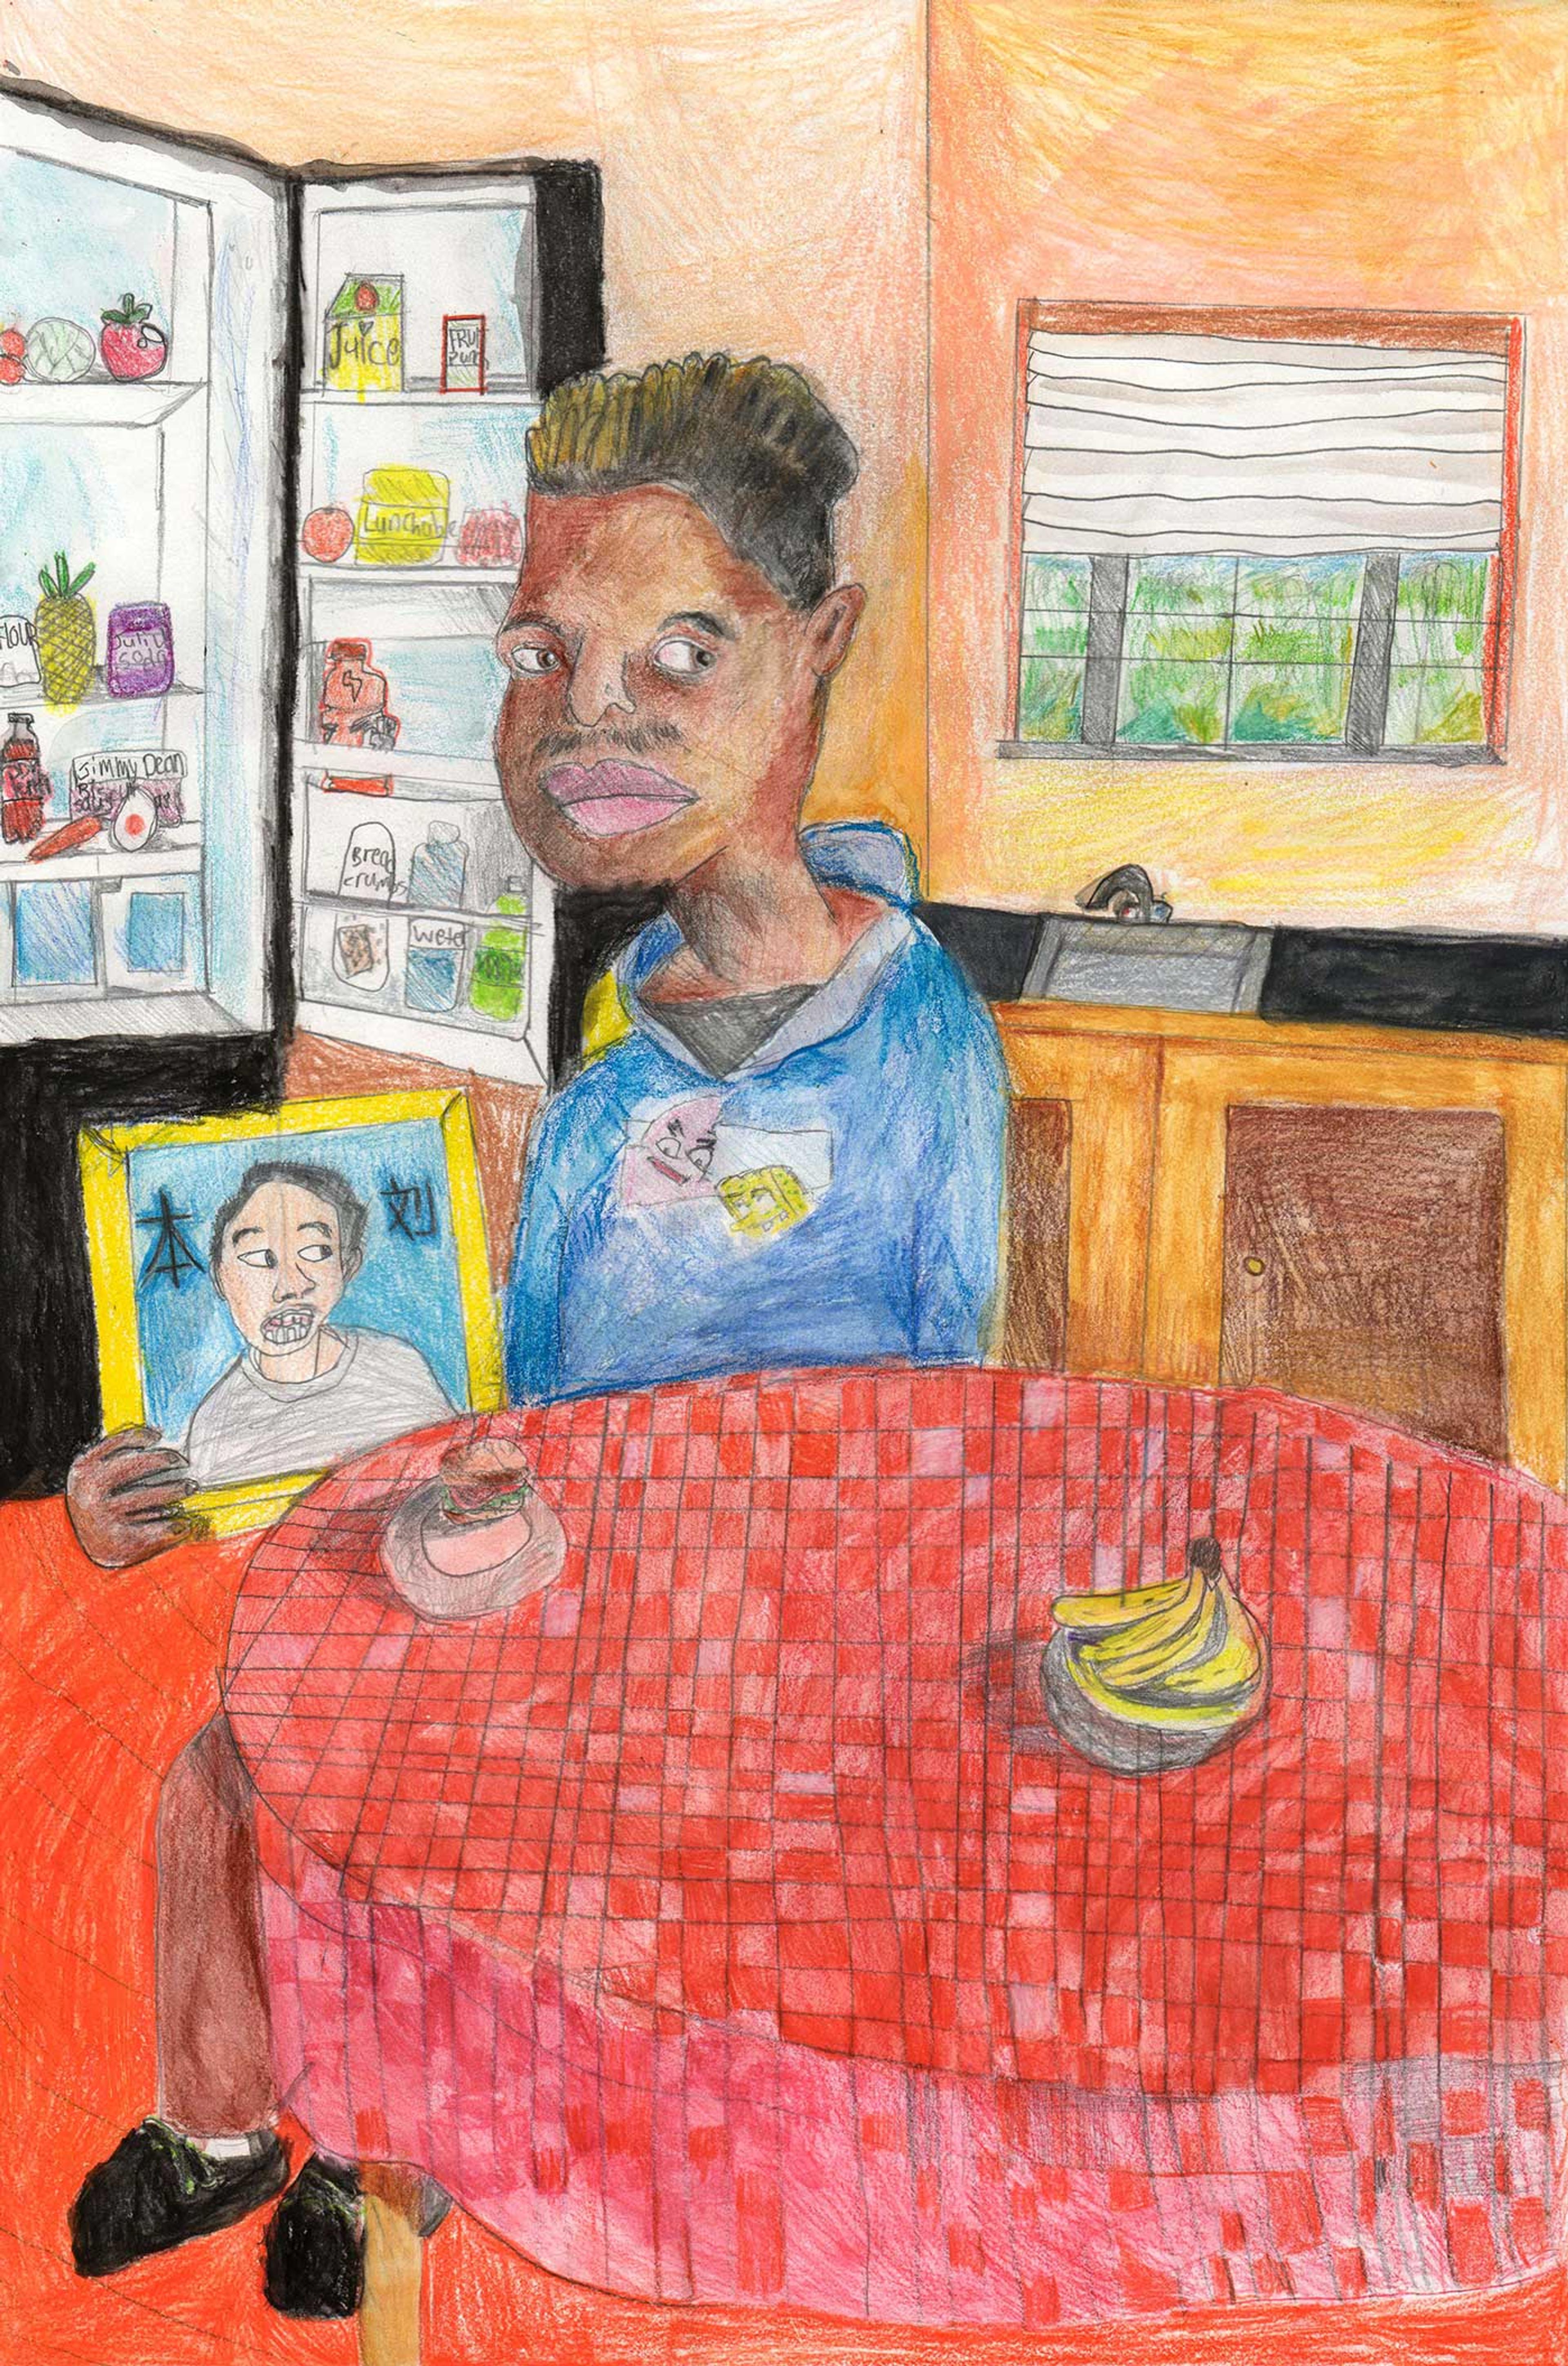 Painting of a boy sitting at a red kitchen table holding a picture of another boy.